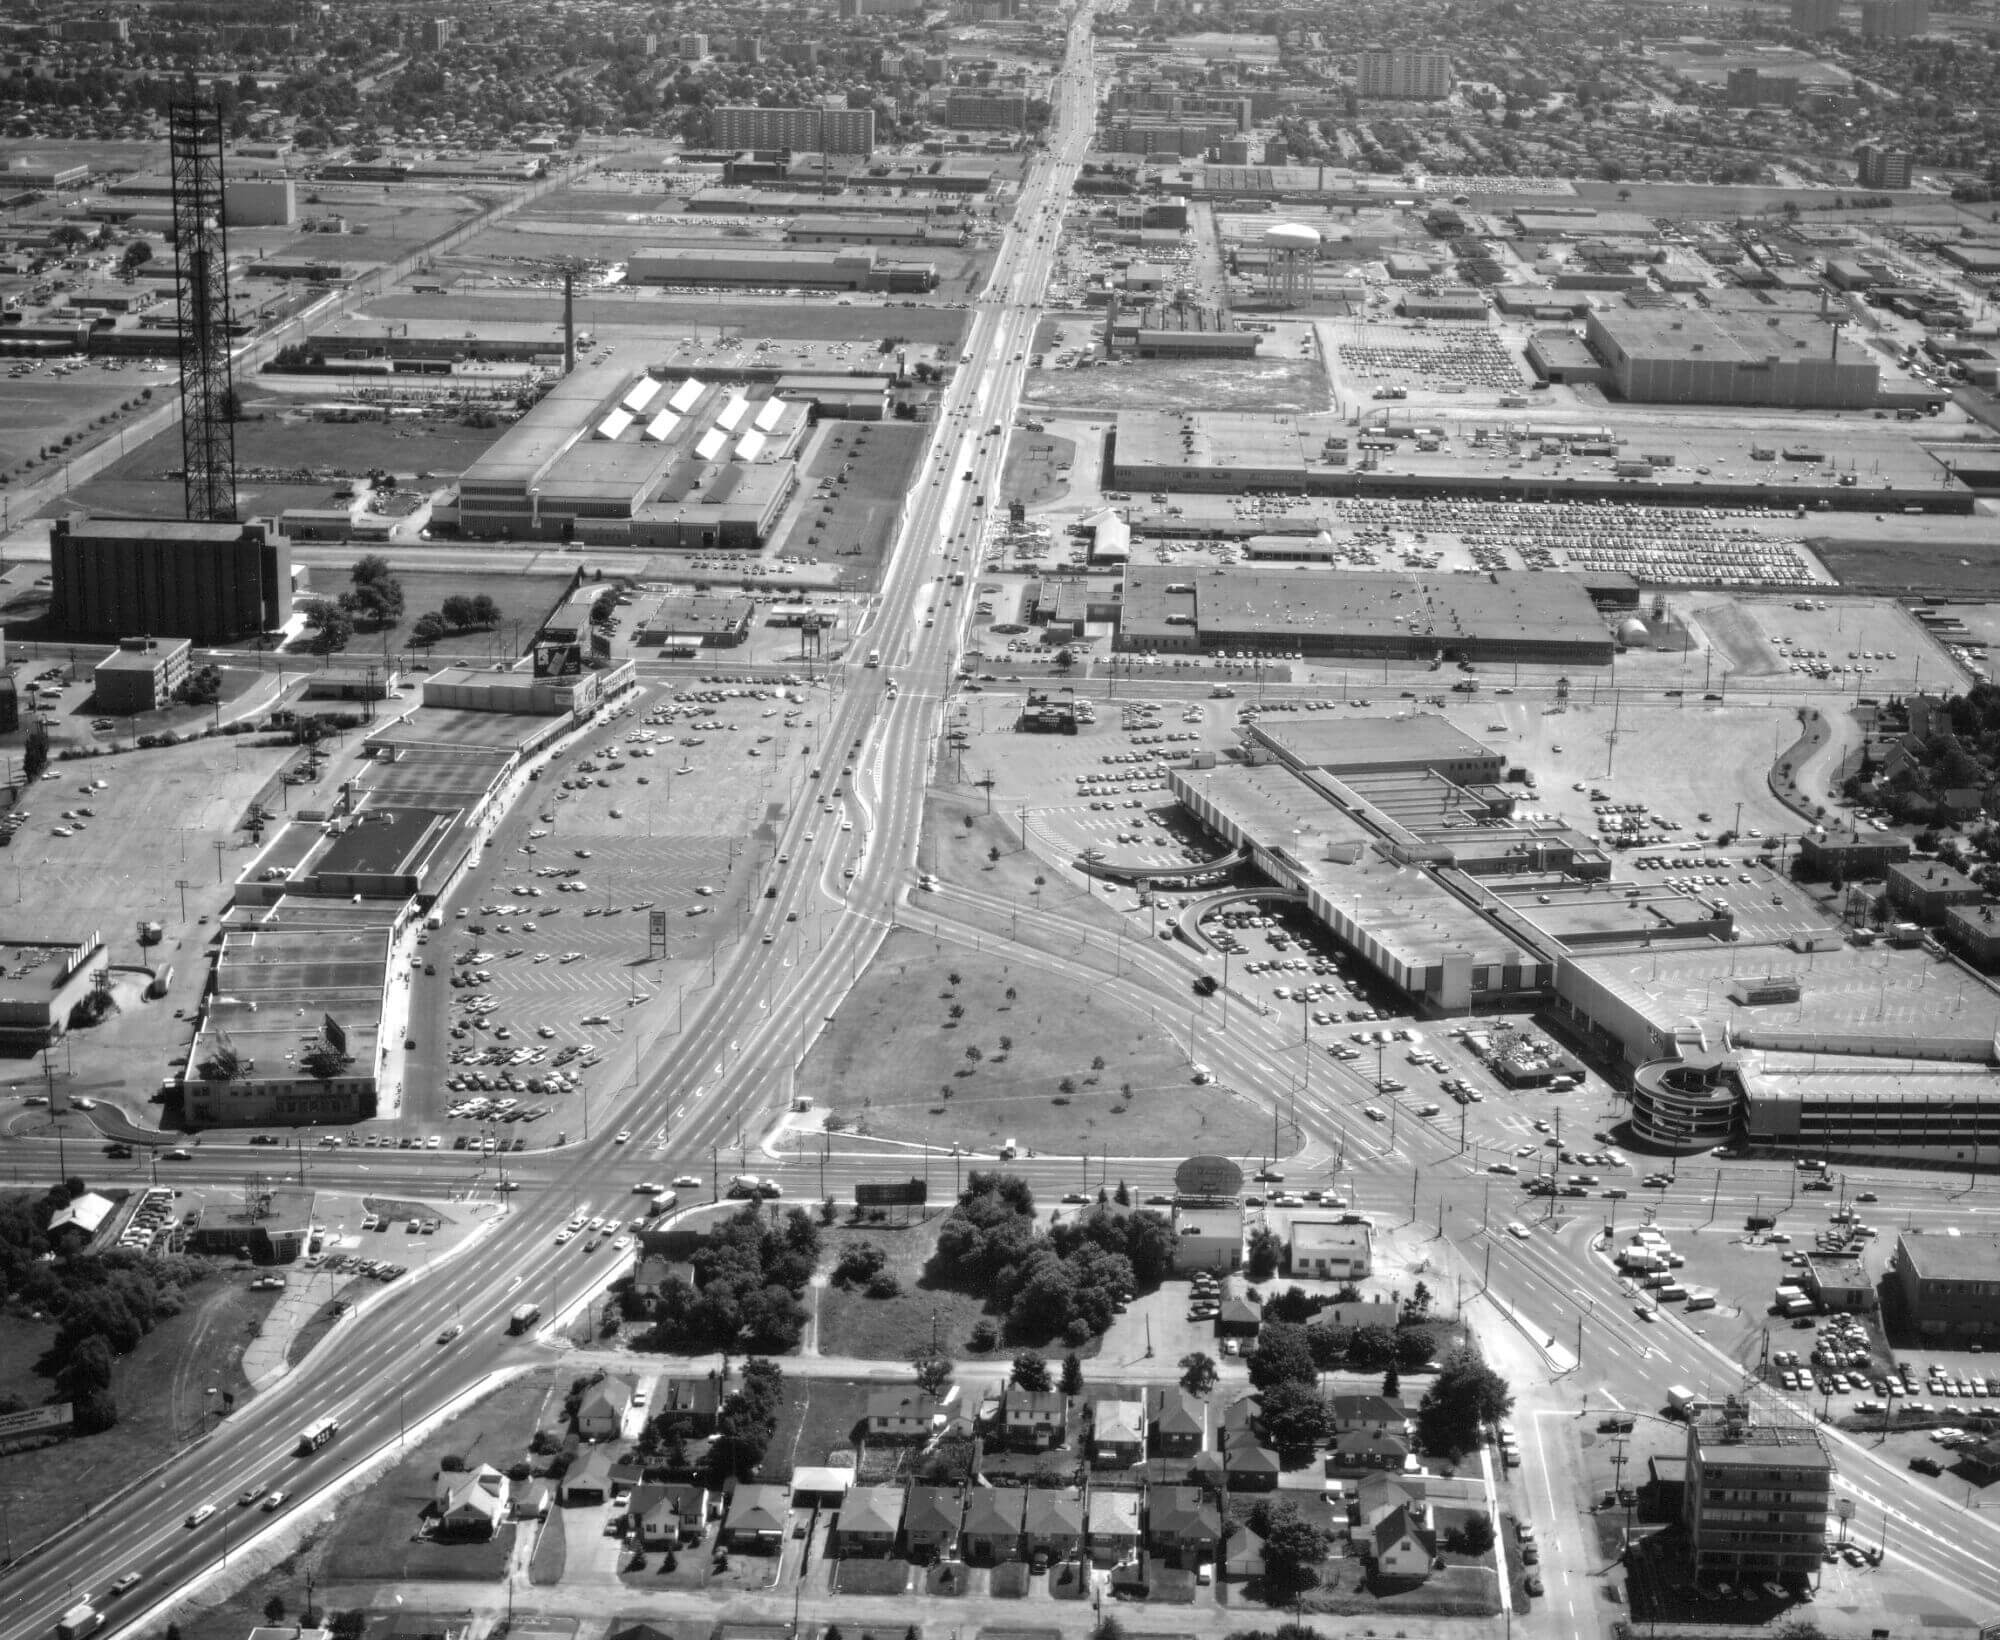 Black and white slightly aerial photograph looking east along Eglinton Avenue East through the Golden Mile from Victoria Park Avenue. Shopping plazas and surface parking lots cover the landscape.